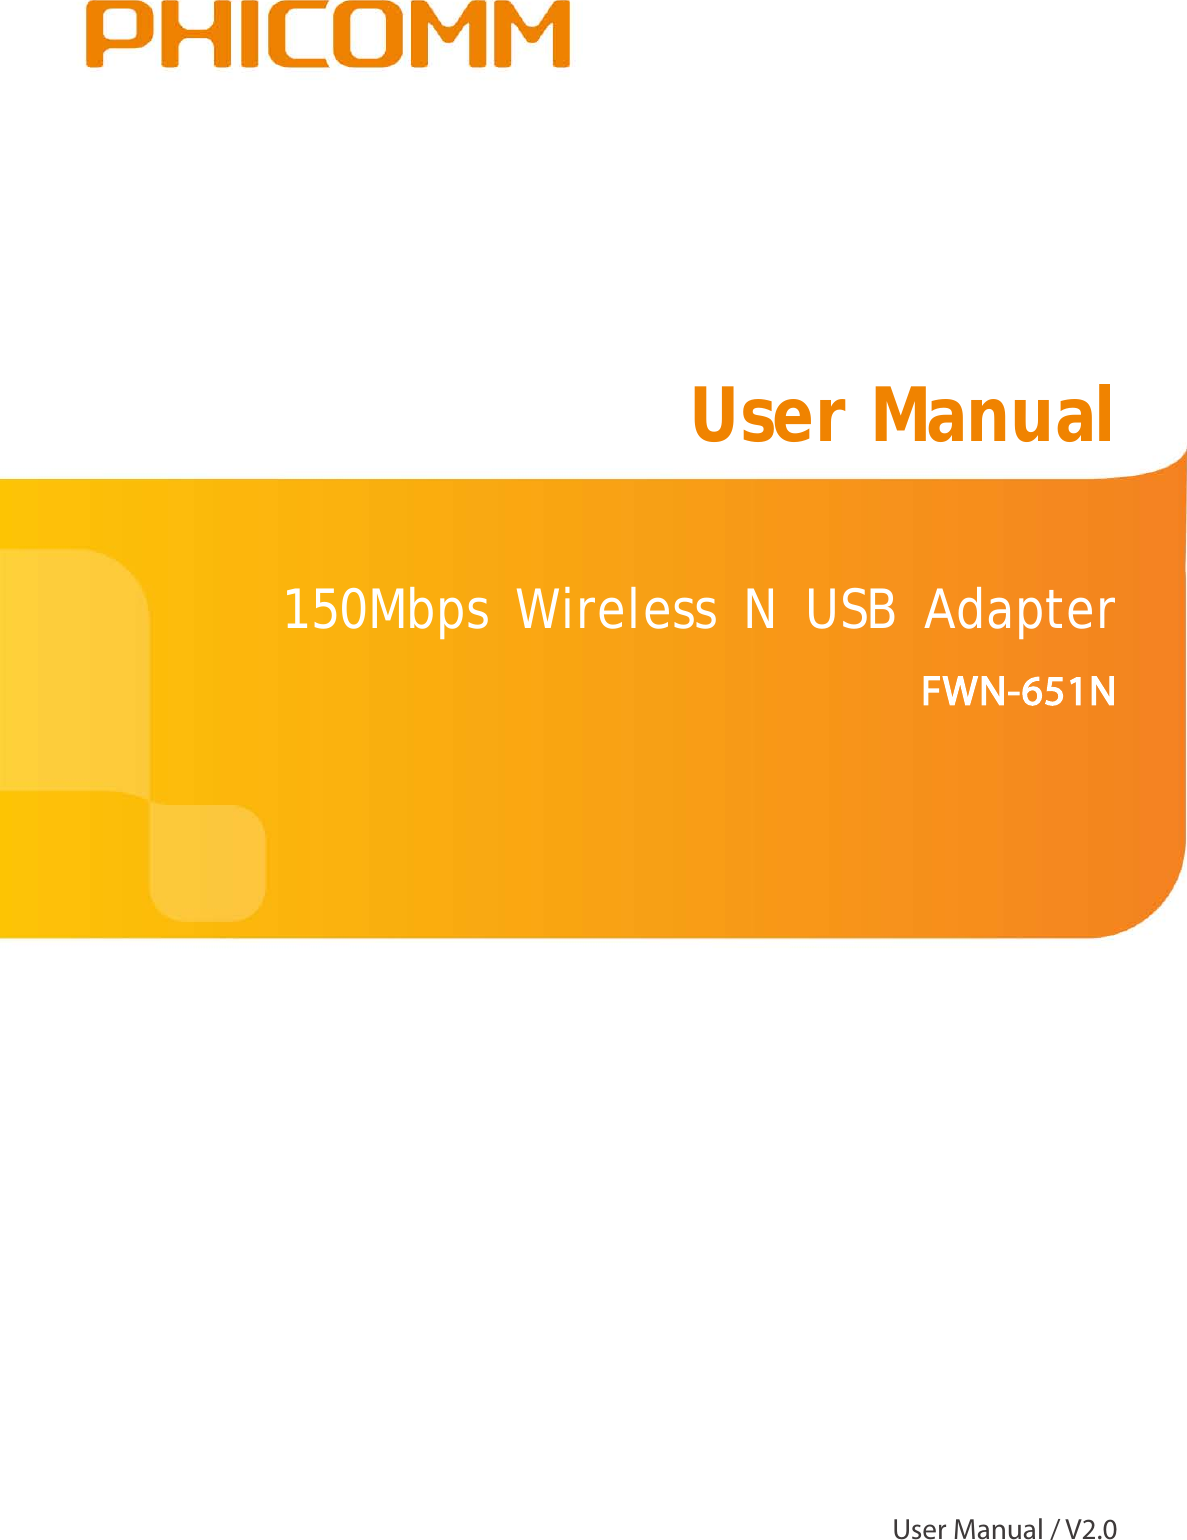                                                            150Mbps Wireless N USB Adapter     FWN-651N  User Manual  User Manual / V2.0 